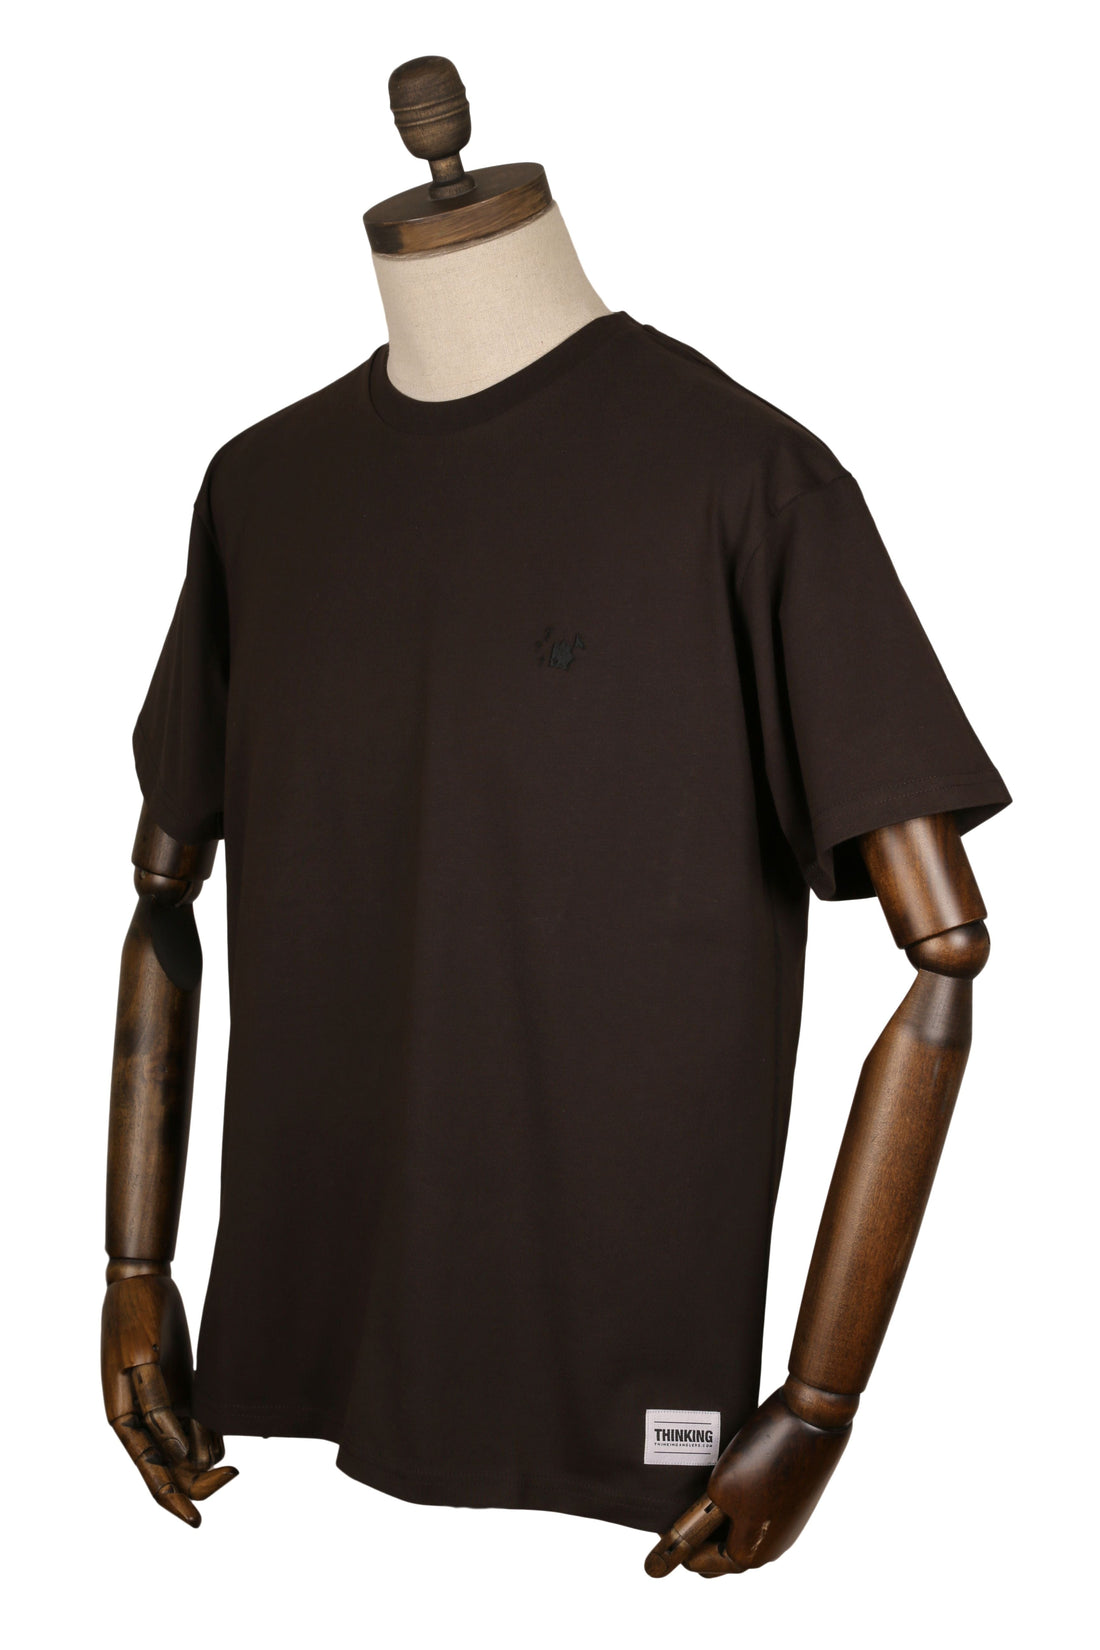 Thinking Anglers T-Shirt Brown Large